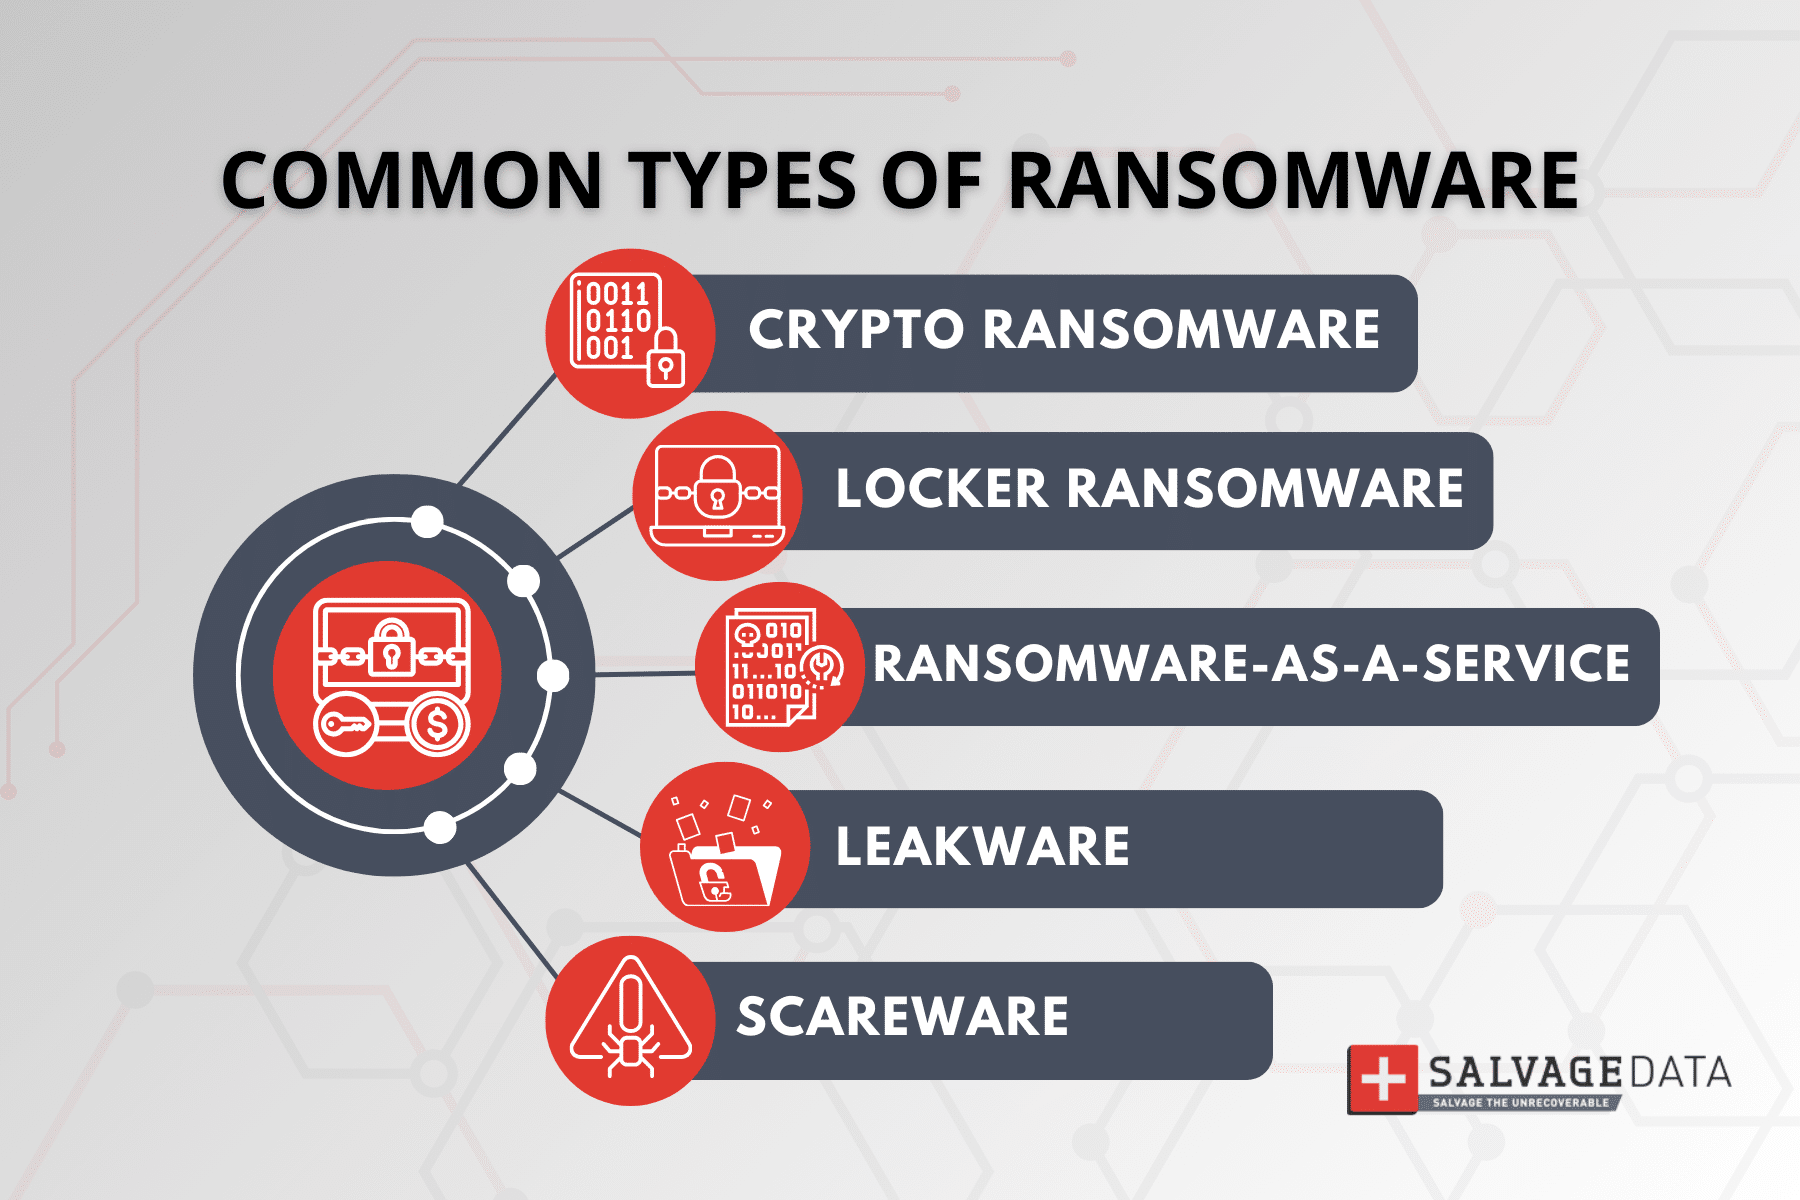 Types of ransomware